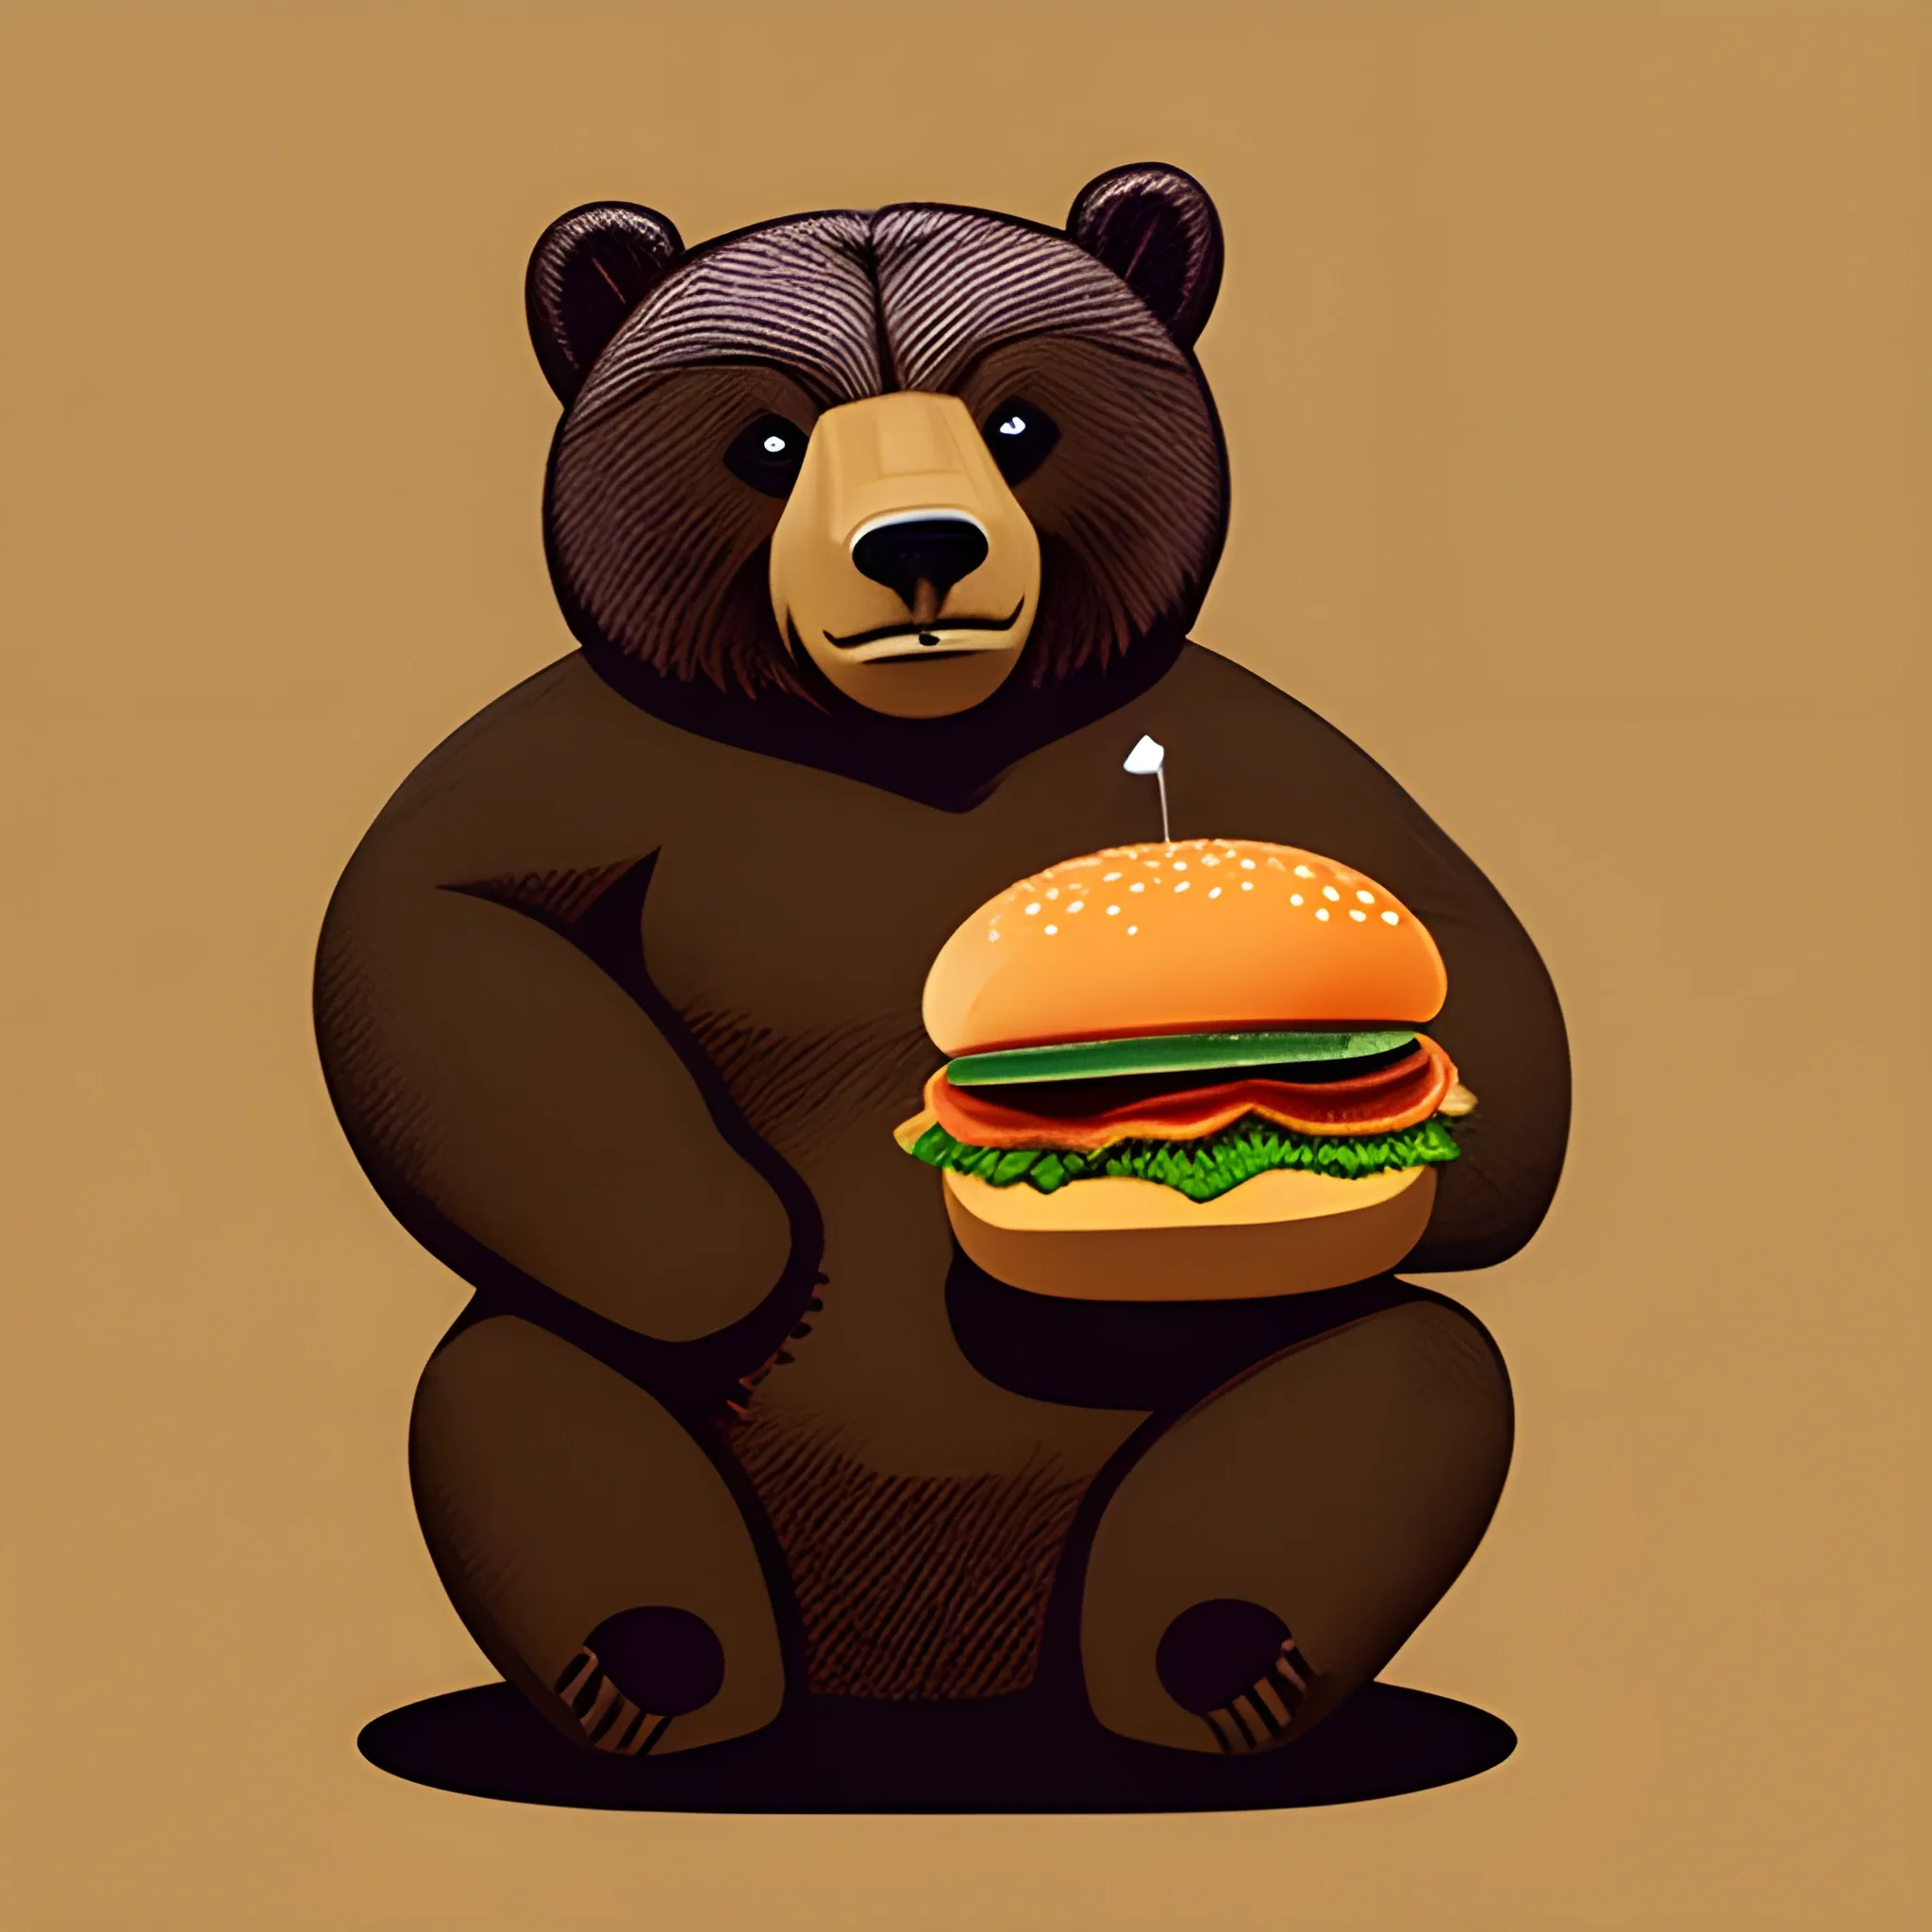 grizzly bear holding a burger logo style